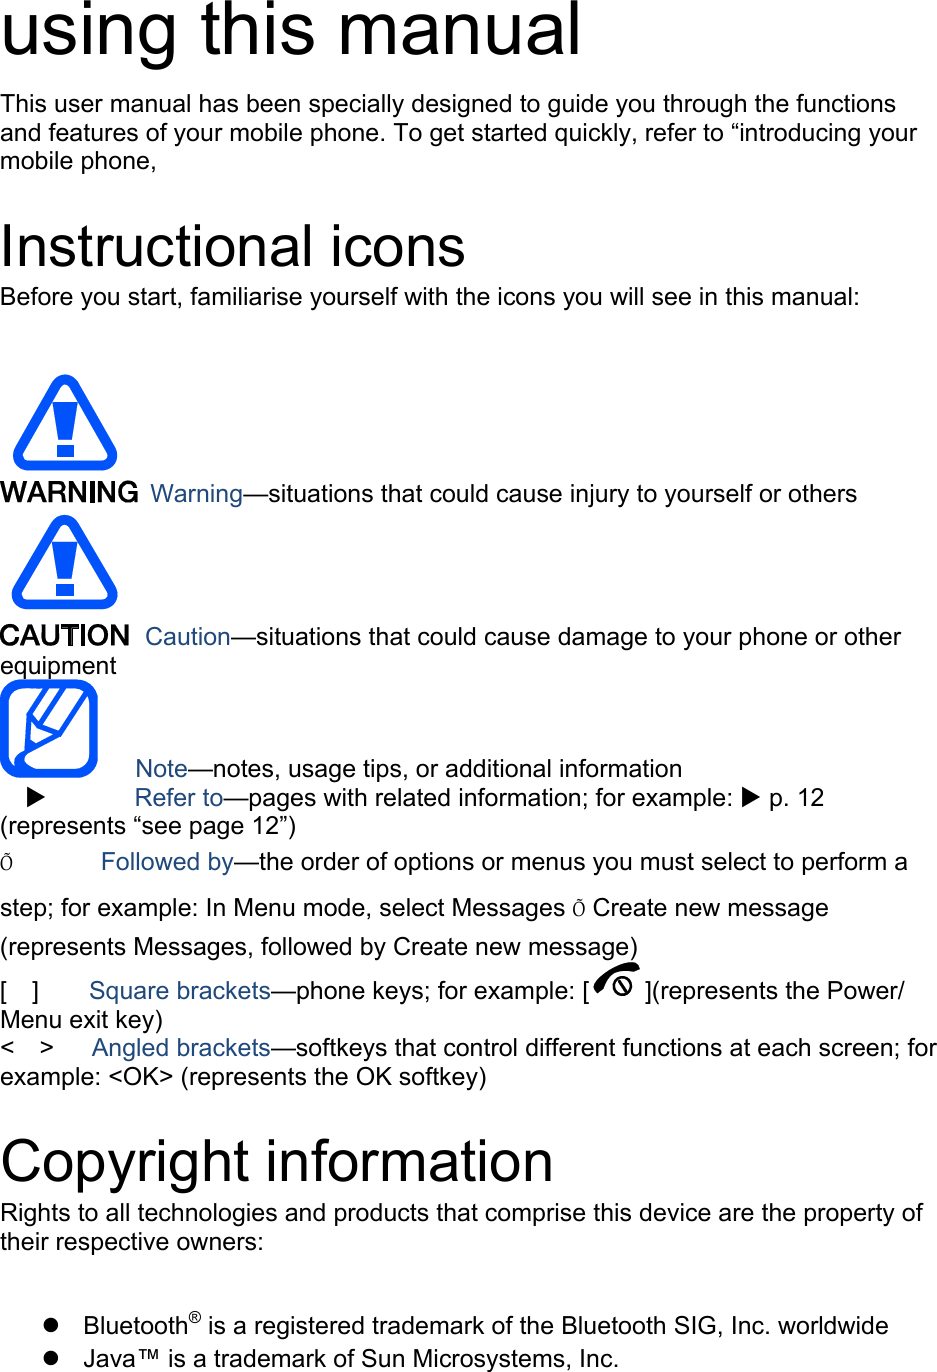  using this manual This user manual has been specially designed to guide you through the functions and features of your mobile phone. To get started quickly, refer to “introducing your mobile phone,  Instructional icons Before you start, familiarise yourself with the icons you will see in this manual:     Warning—situations that could cause injury to yourself or others  Caution—situations that could cause damage to your phone or other equipment    Note—notes, usage tips, or additional information   X       Refer to—pages with related information; for example: X p. 12 (represents “see page 12”) Õ       Followed by—the order of options or menus you must select to perform a step; for example: In Menu mode, select Messages Õ Create new message (represents Messages, followed by Create new message) [  ]    Square brackets—phone keys; for example: [ ](represents the Power/ Menu exit key) &lt;  &gt;   Angled brackets—softkeys that control different functions at each screen; for example: &lt;OK&gt; (represents the OK softkey)  Copyright information Rights to all technologies and products that comprise this device are the property of their respective owners:  z Bluetooth® is a registered trademark of the Bluetooth SIG, Inc. worldwide z  Java™ is a trademark of Sun Microsystems, Inc. 